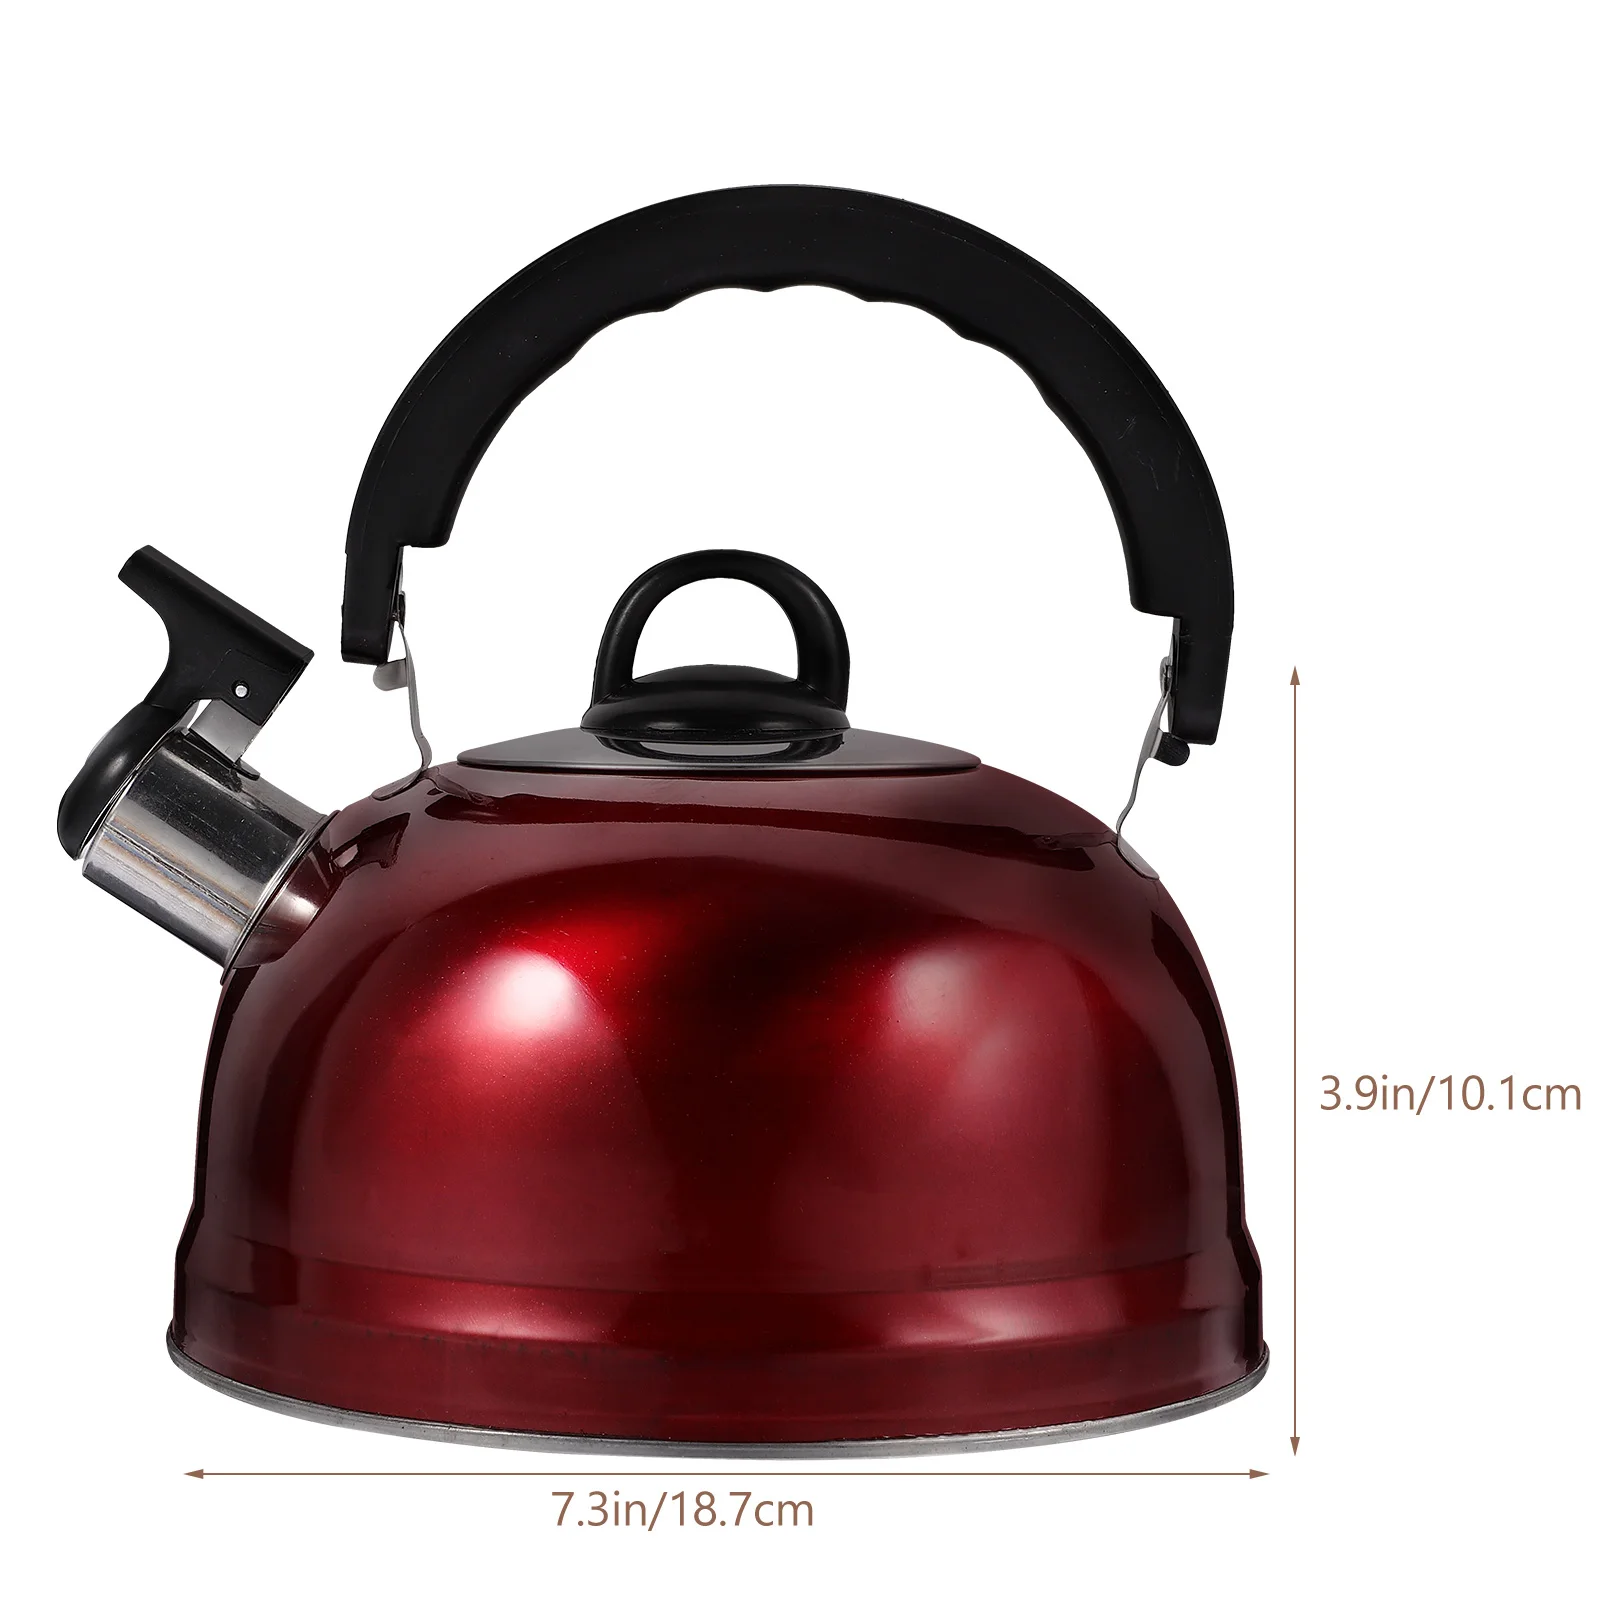 Kettle Tea Teapot Stovesteel Stainlesswater Stovetop Boiler Pot Camping  Electric Whistling Pots Induction Small Metal Kettles